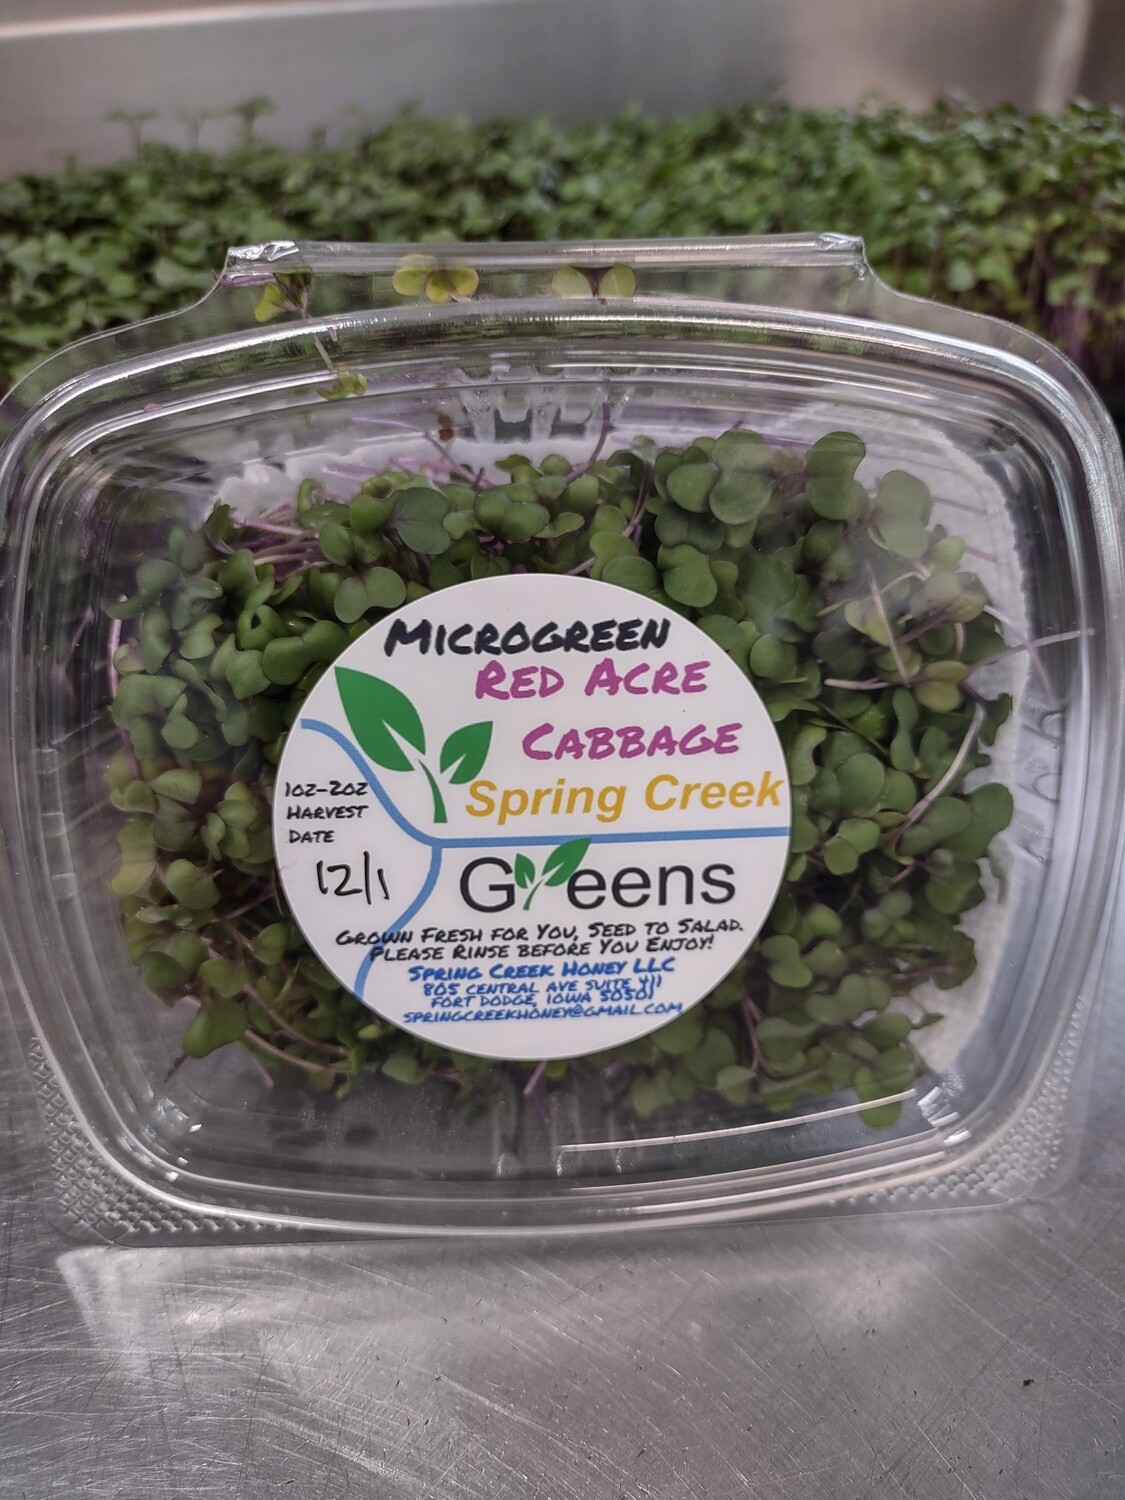 Microgreen Red Acre Cabbage